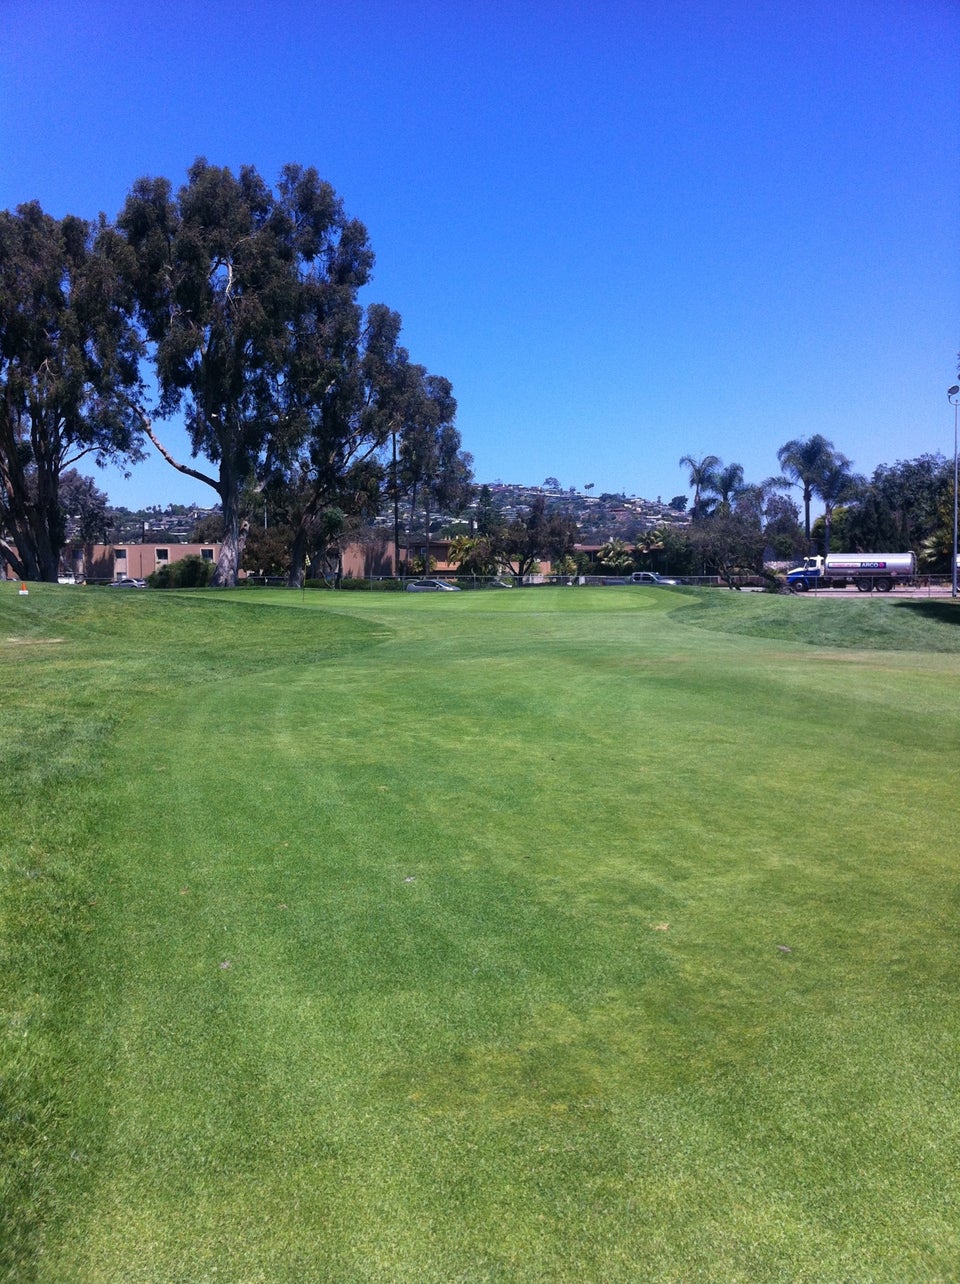 Mission Bay Golf Course